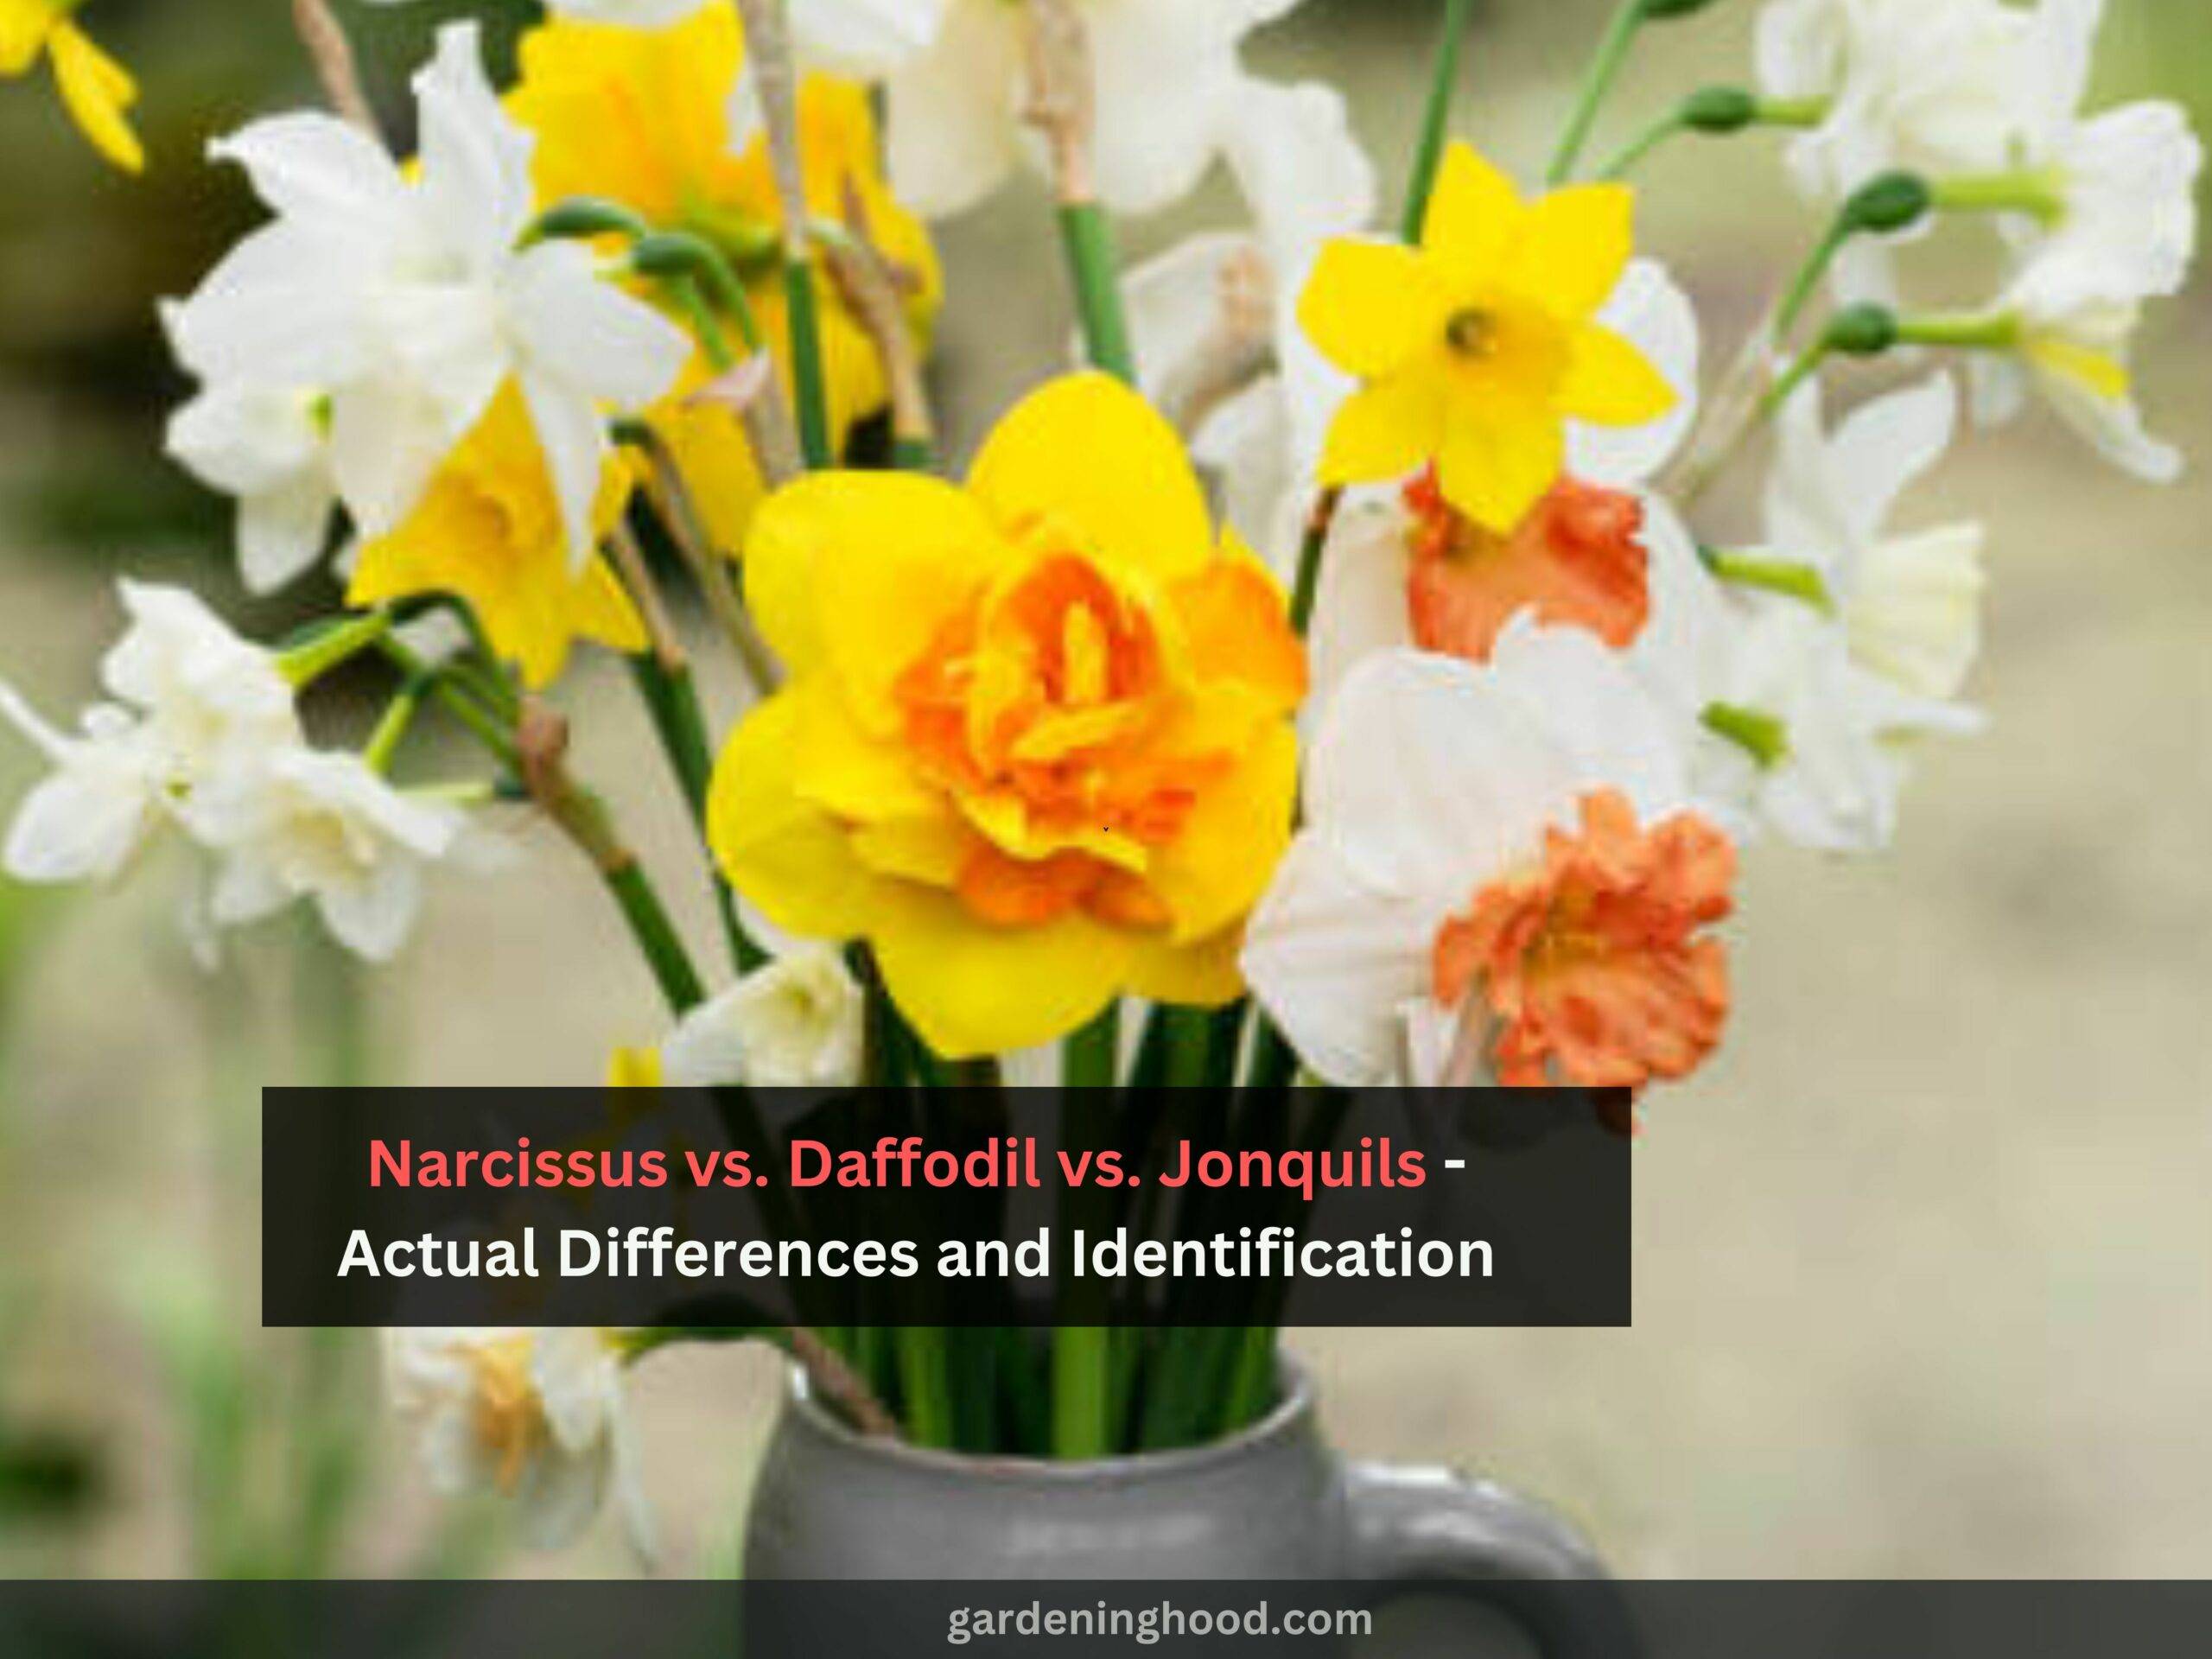 Narcissus vs. Daffodil vs. Jonquils - Actual Differences and Identification